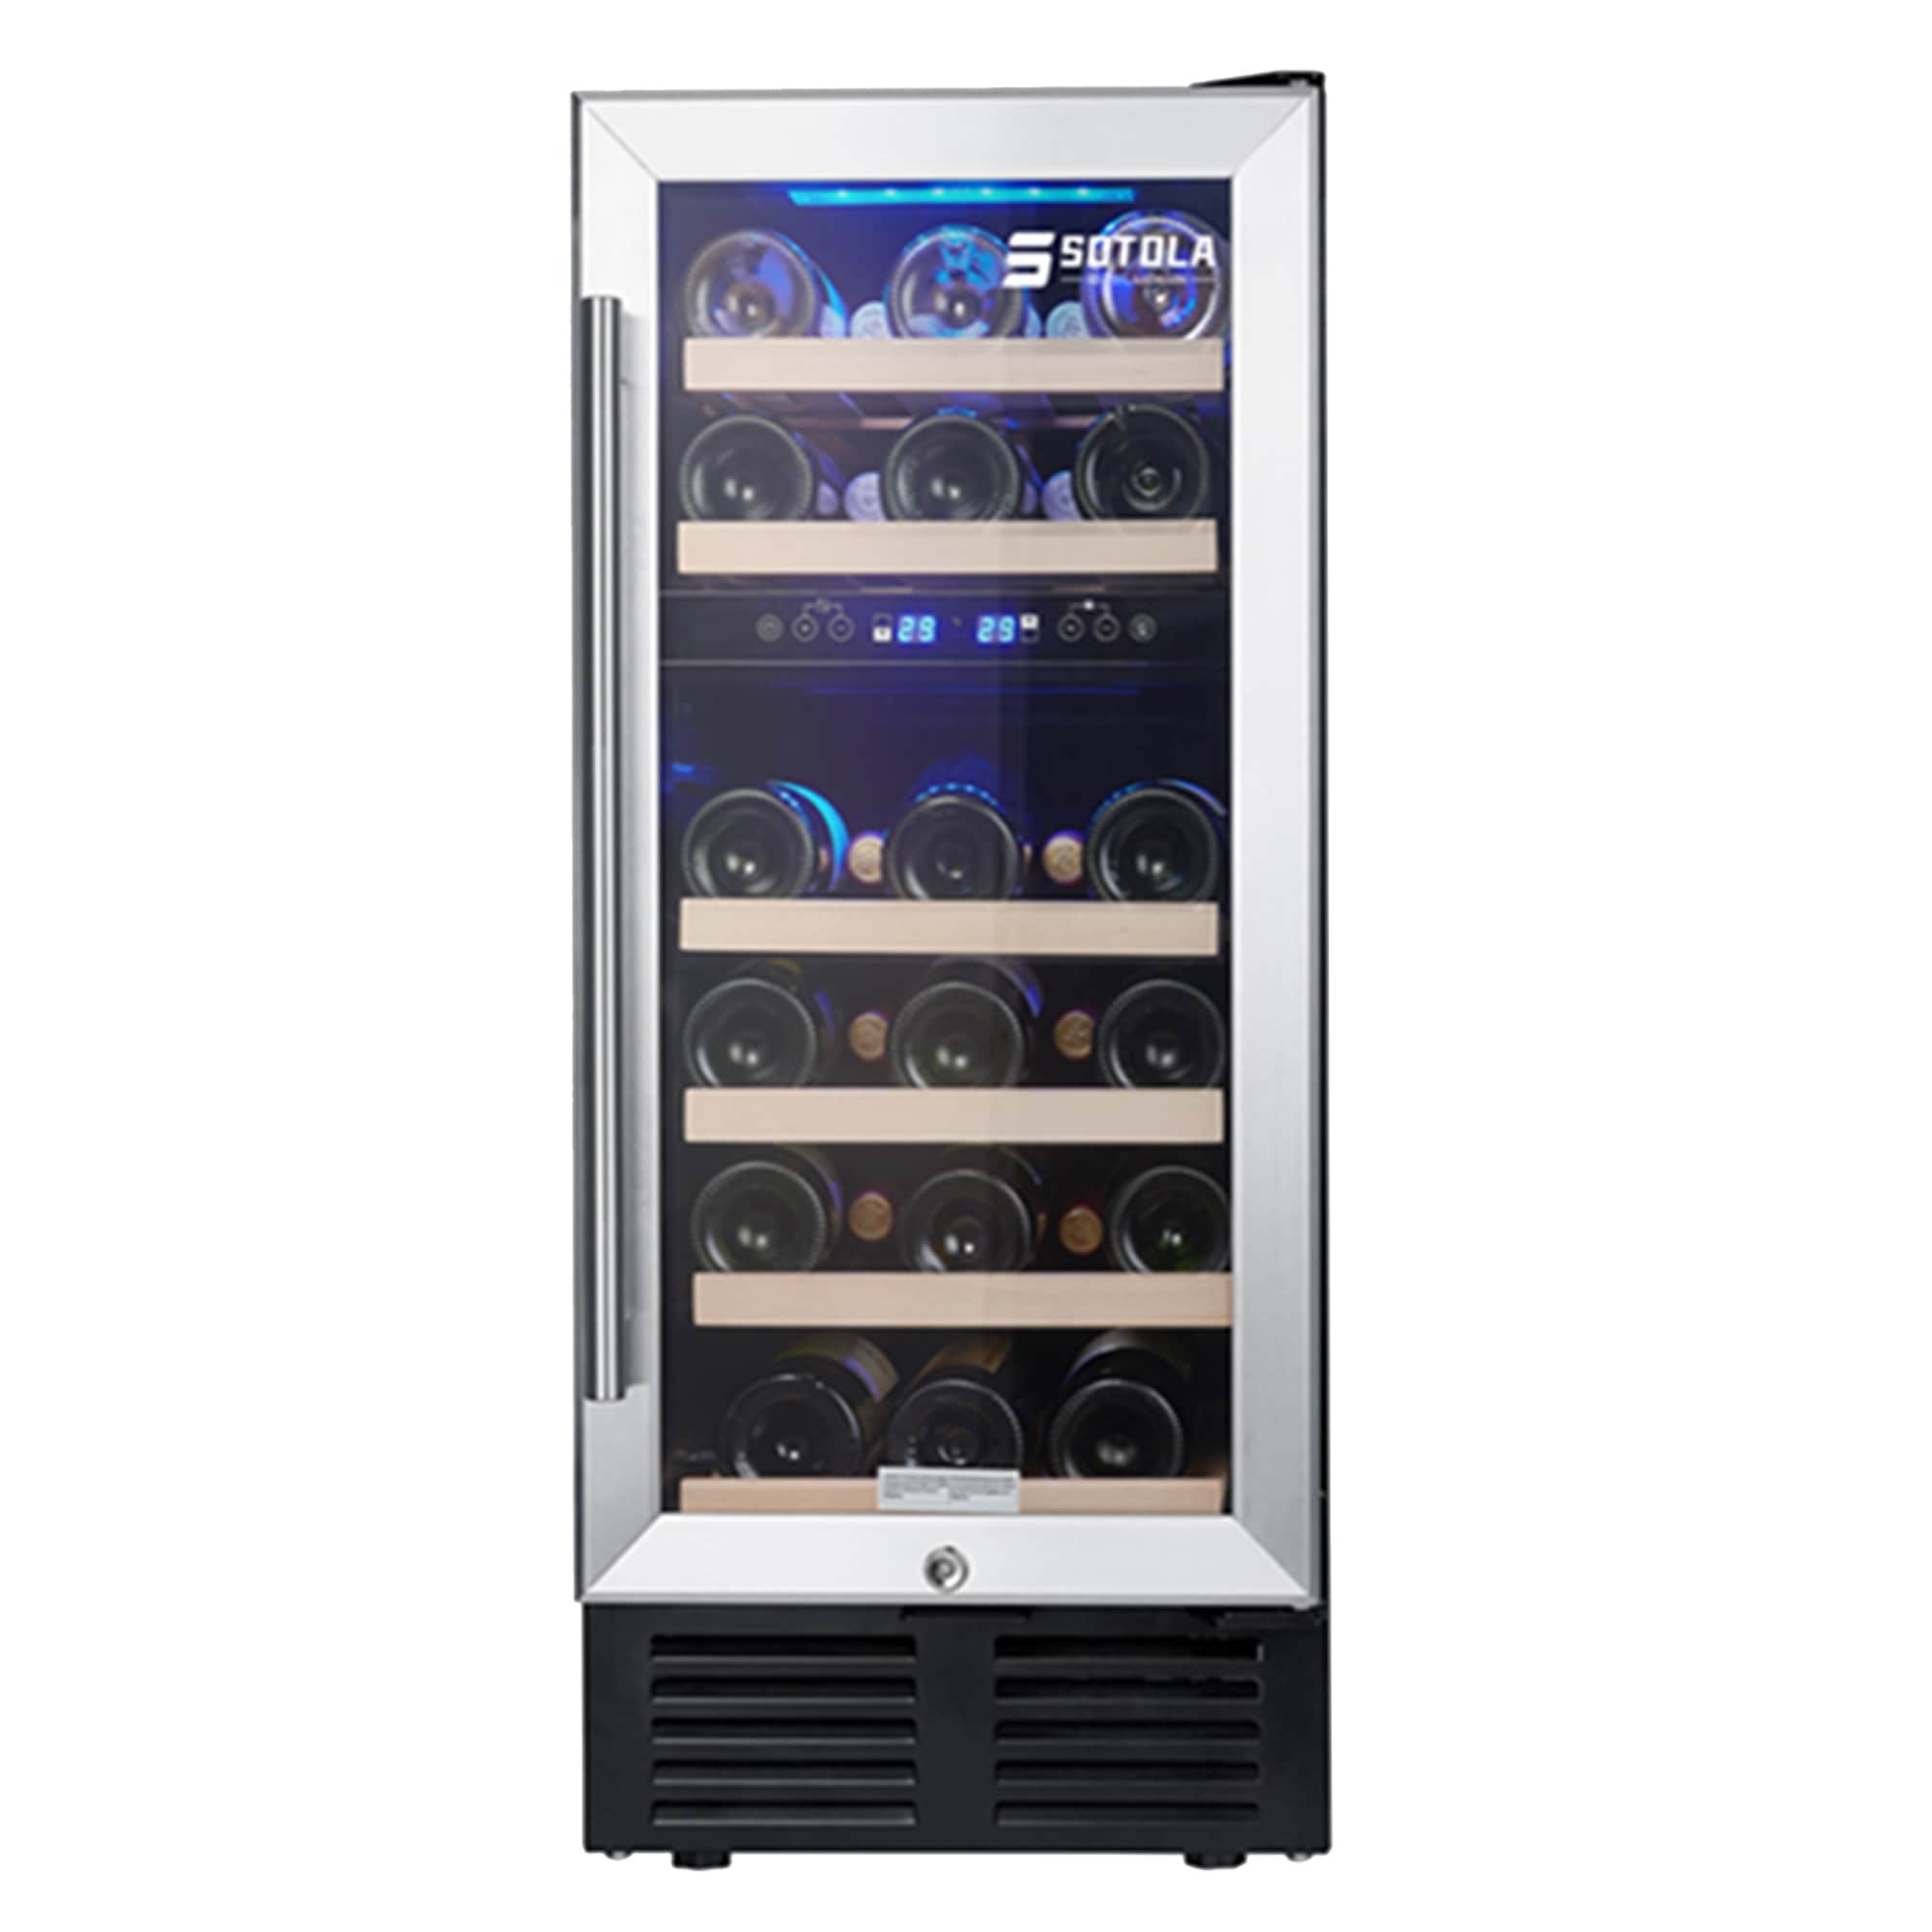 https://ak1.ostkcdn.com/images/products/is/images/direct/4b9400a373094178f747e04e04bd035f2a60066e/Freestanding-Wine-Cooler-Cabinet-Beverage-Fridge-Small-Wine-Cellar.jpg